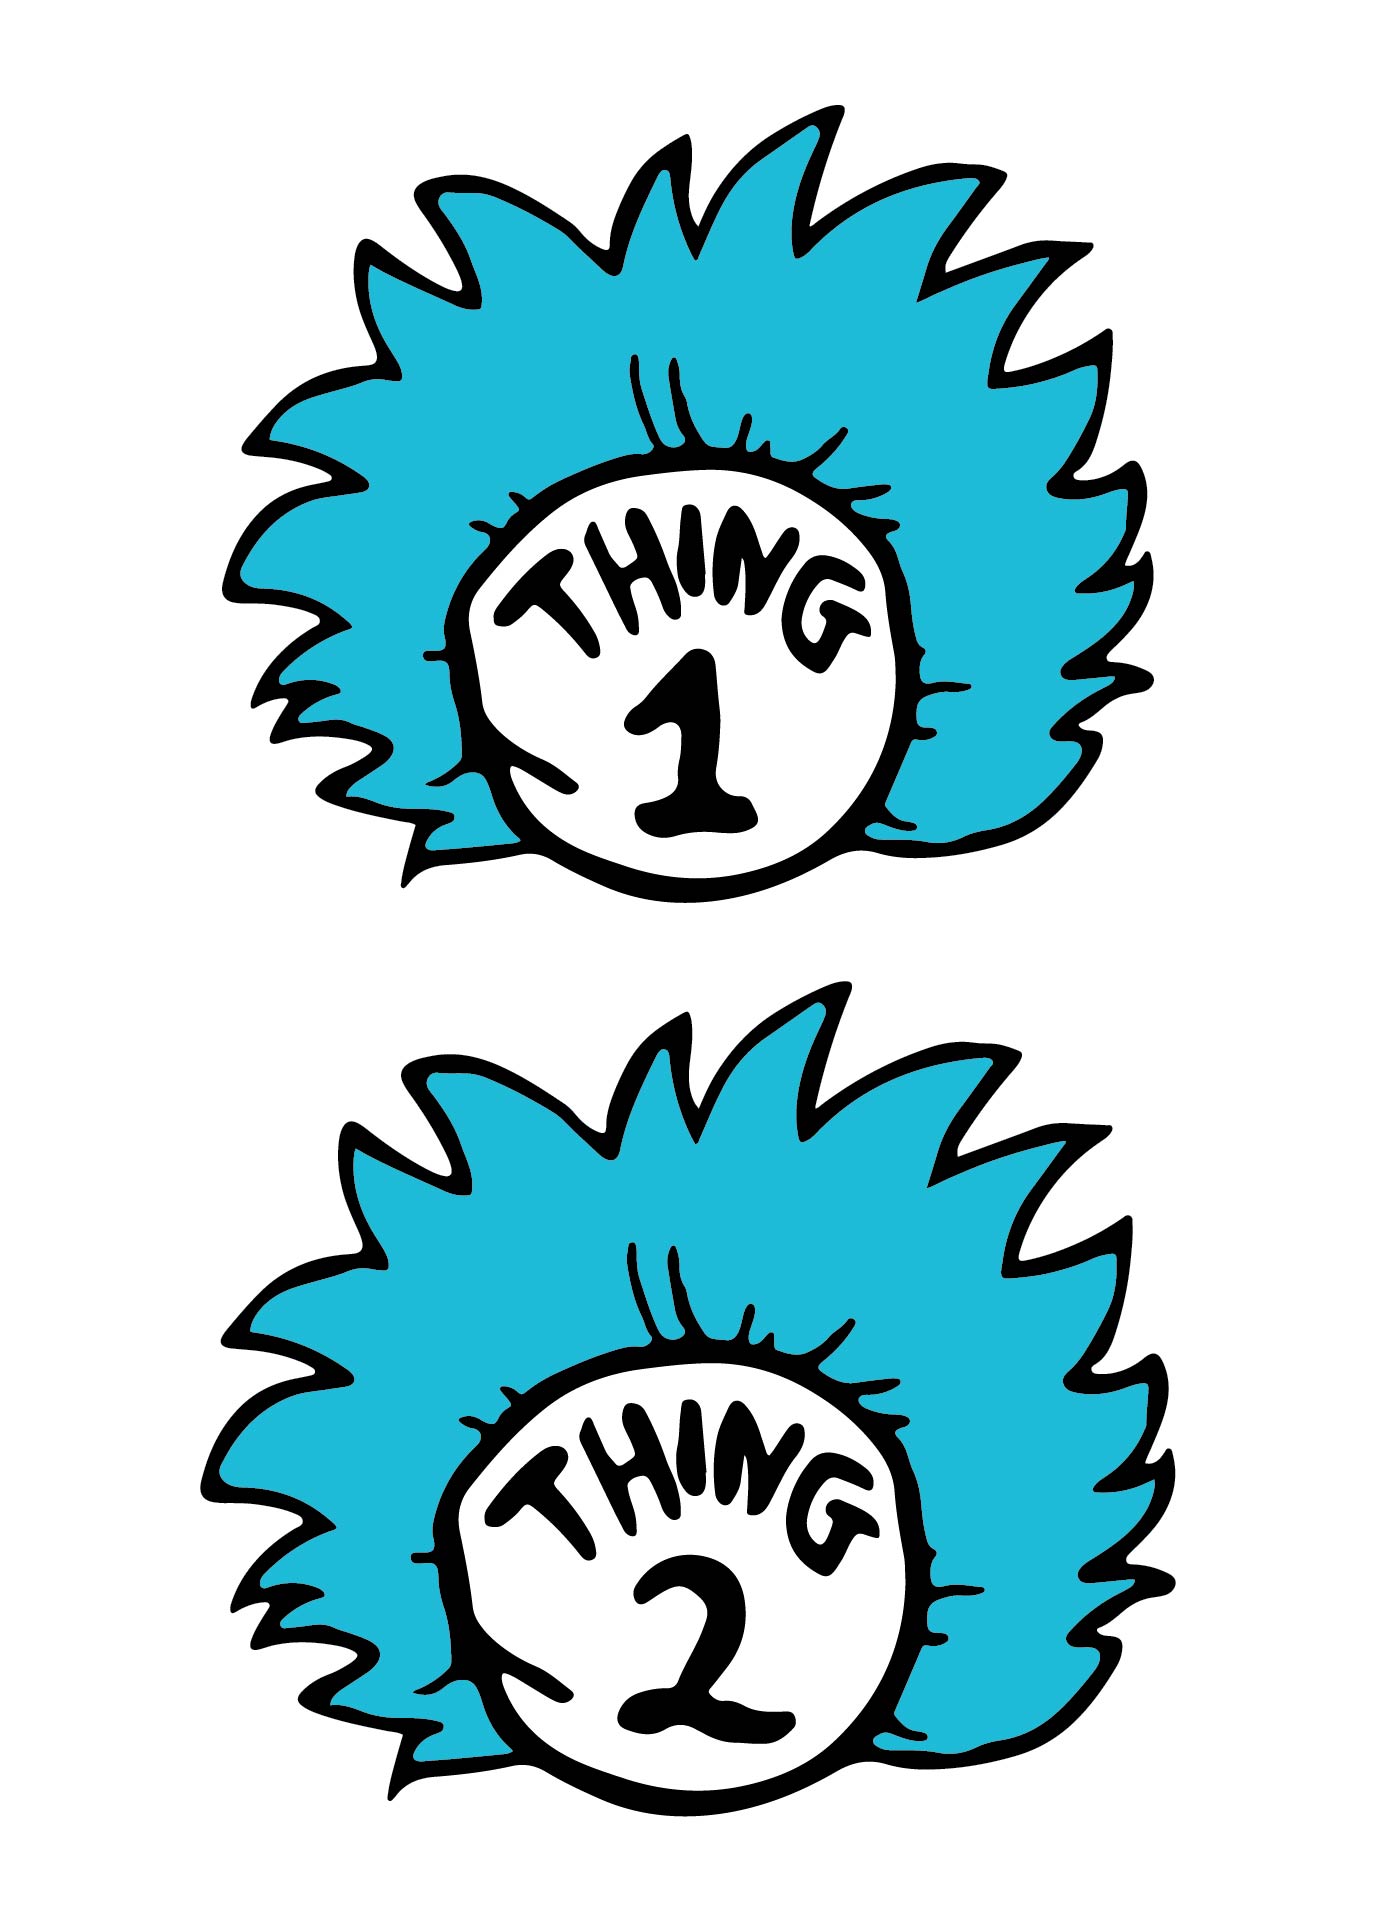 thing-1-and-thing-2-printable-images